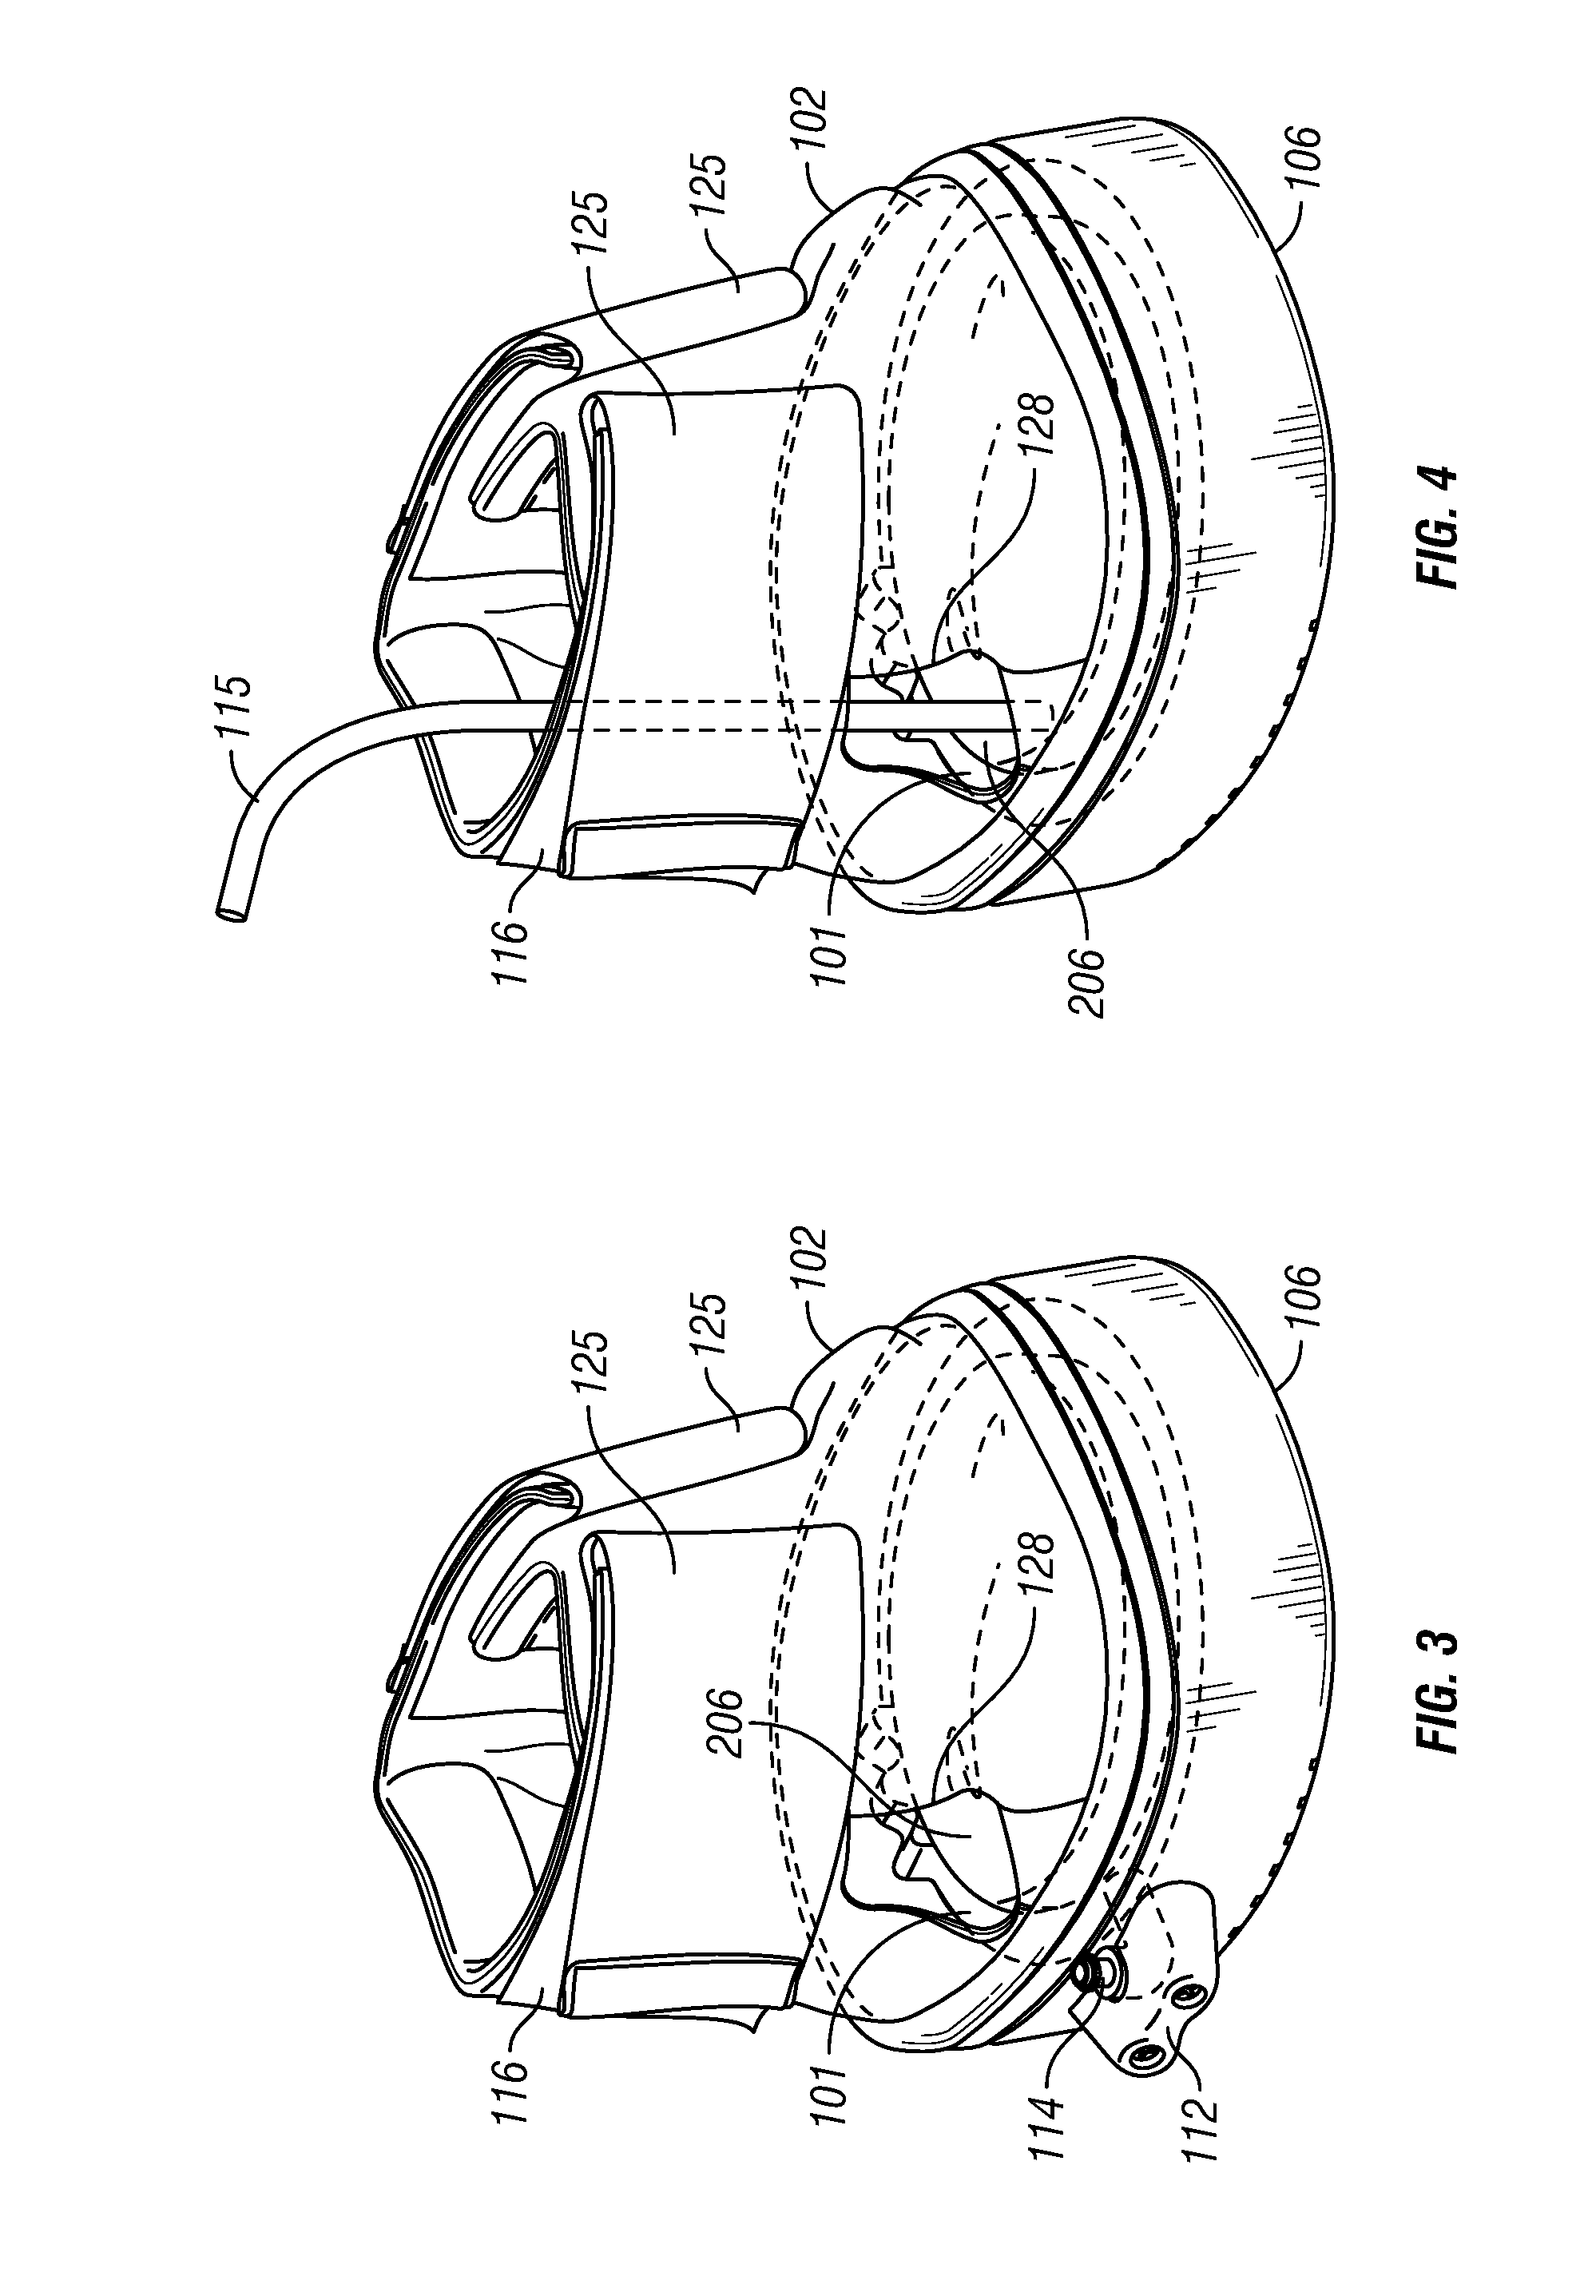 Equine Exercise Boot Assembly and Method